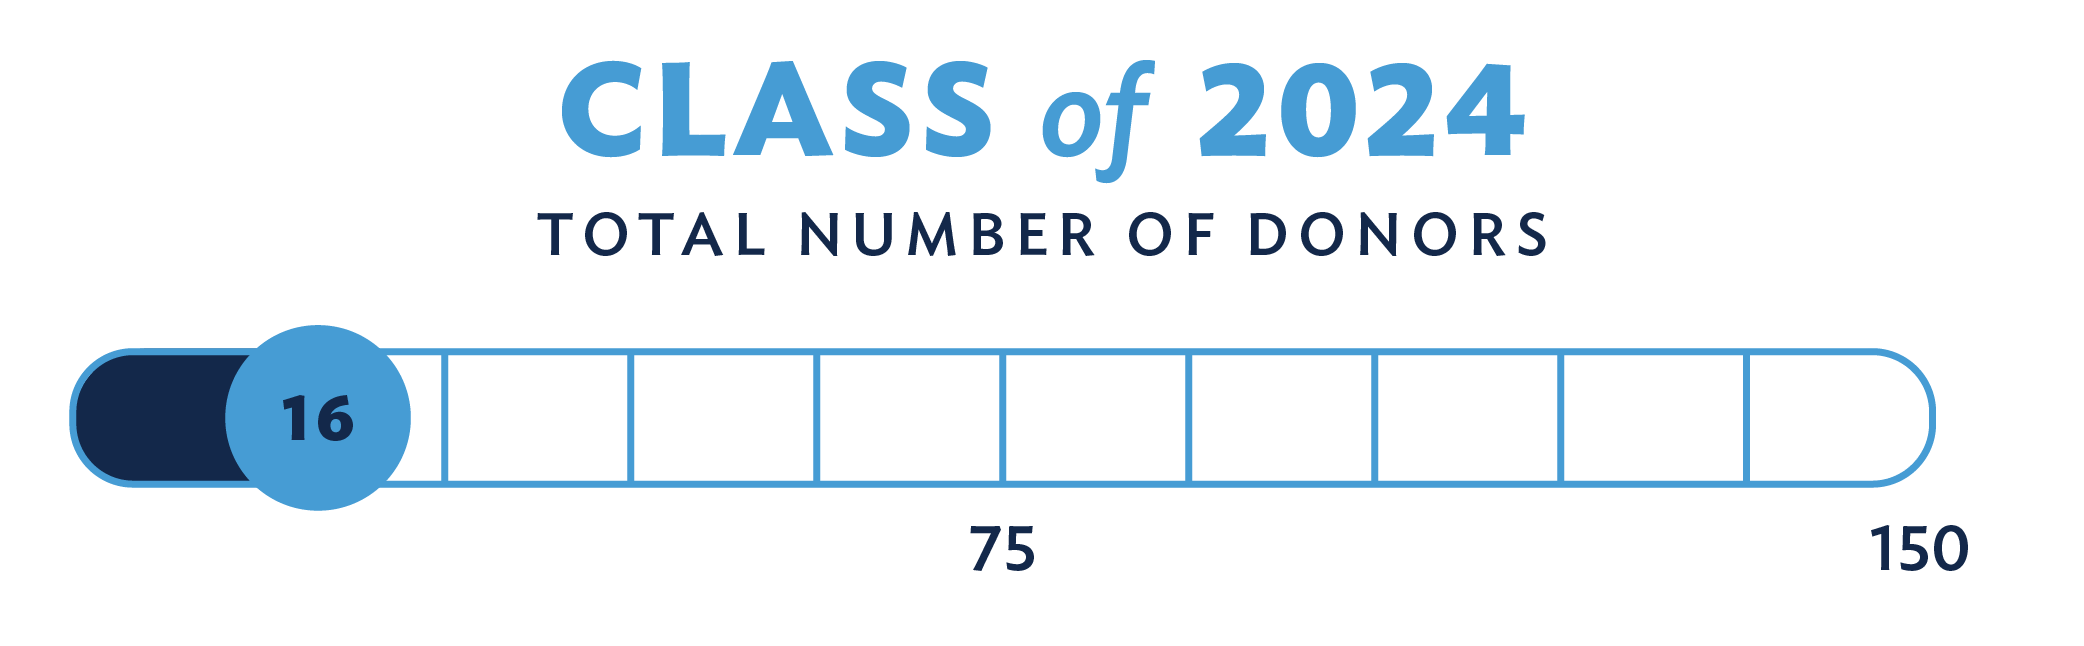 Class of 2024 Total number of donors: 16 out of a goal of 150